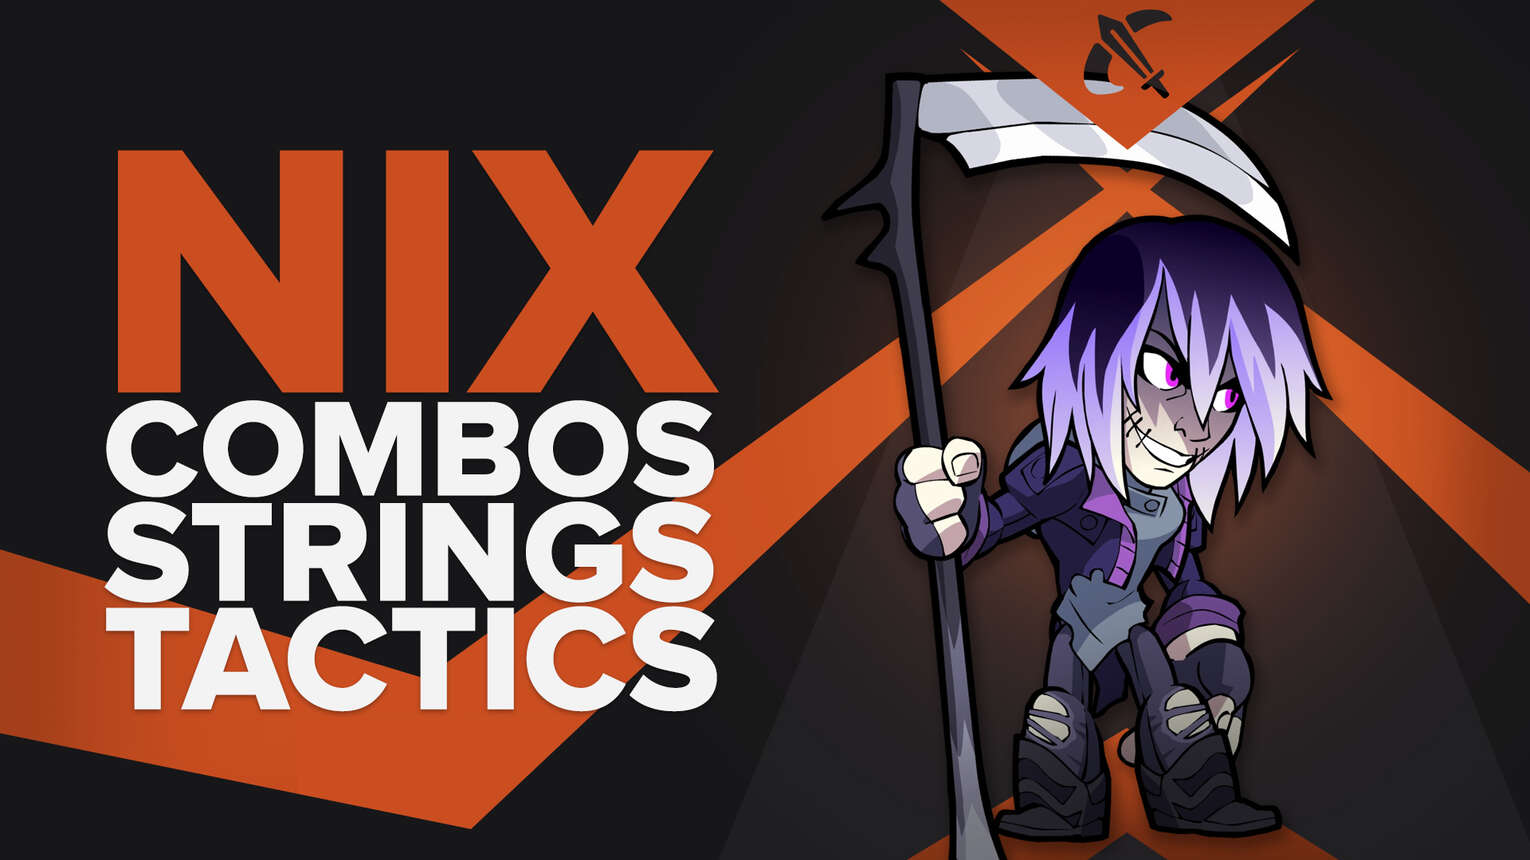 Best Nix combos, strings, and combat tactics in Brawlhalla